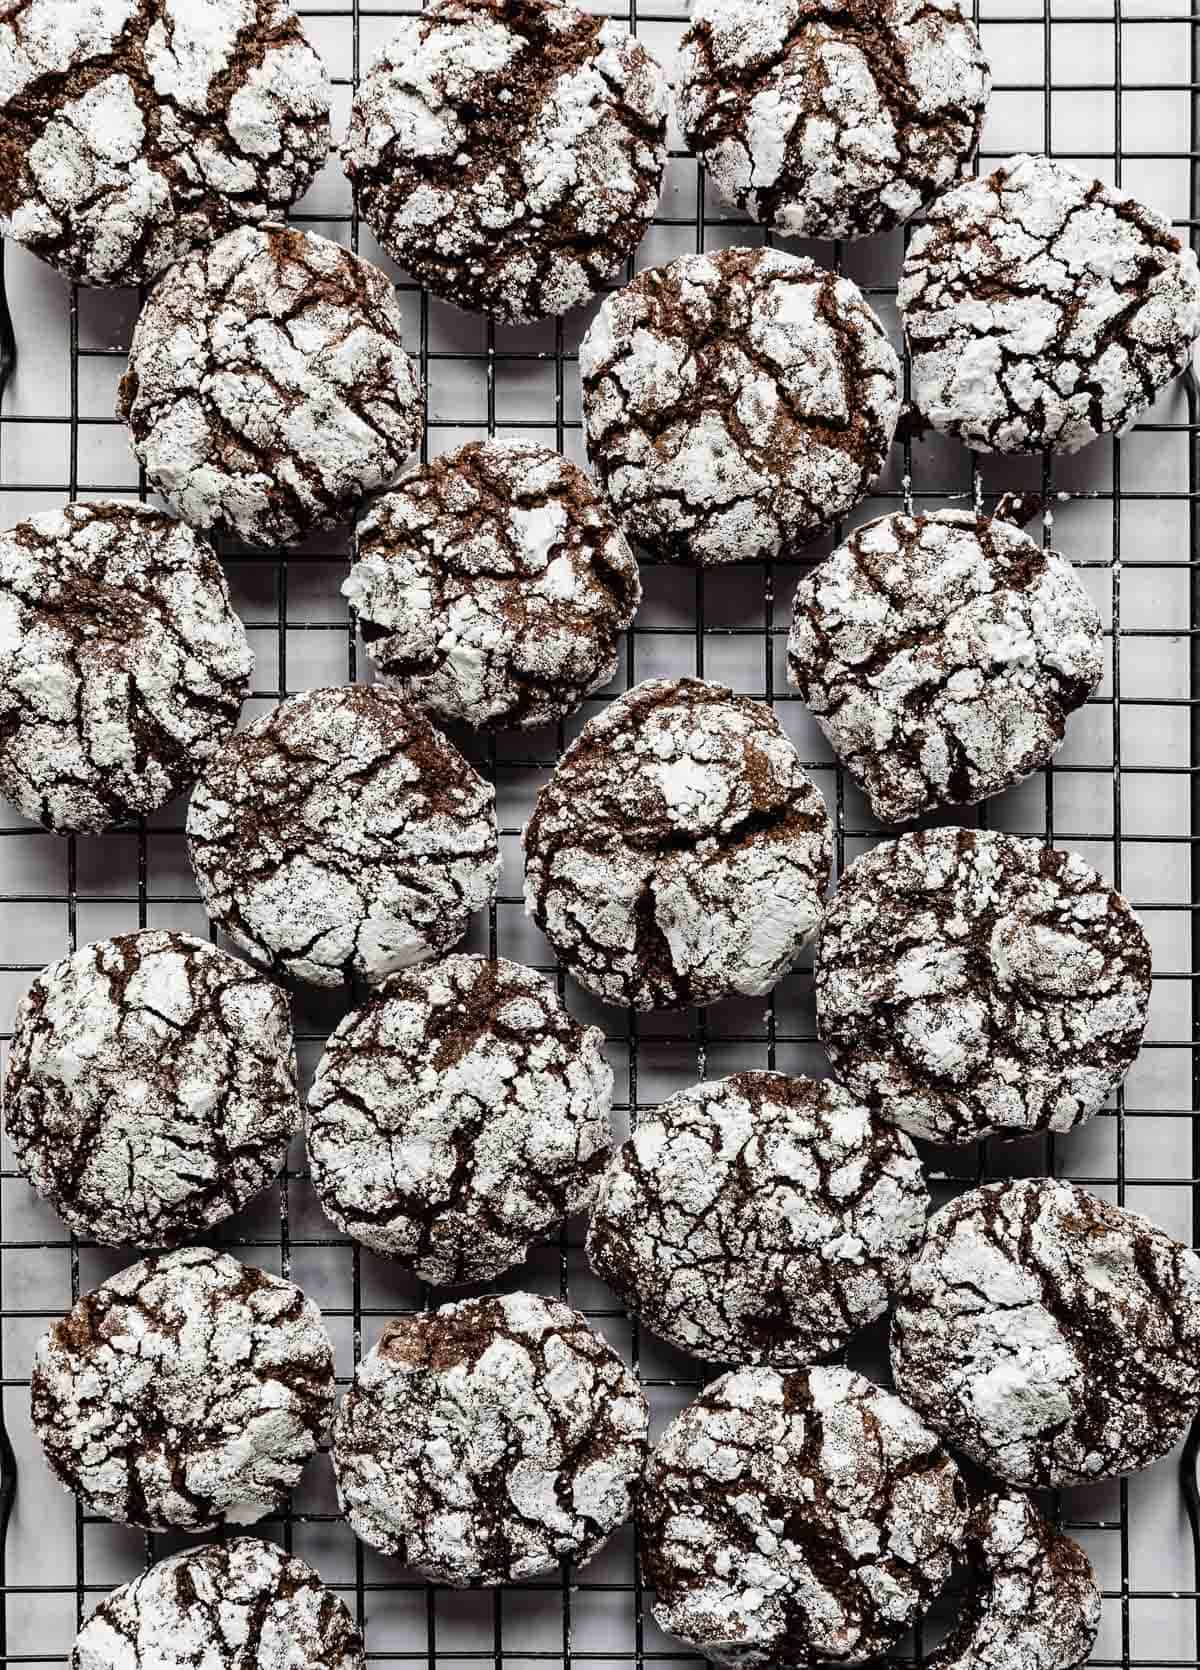 Chocolate Crinkle Cookies on a black wire cooling rack.